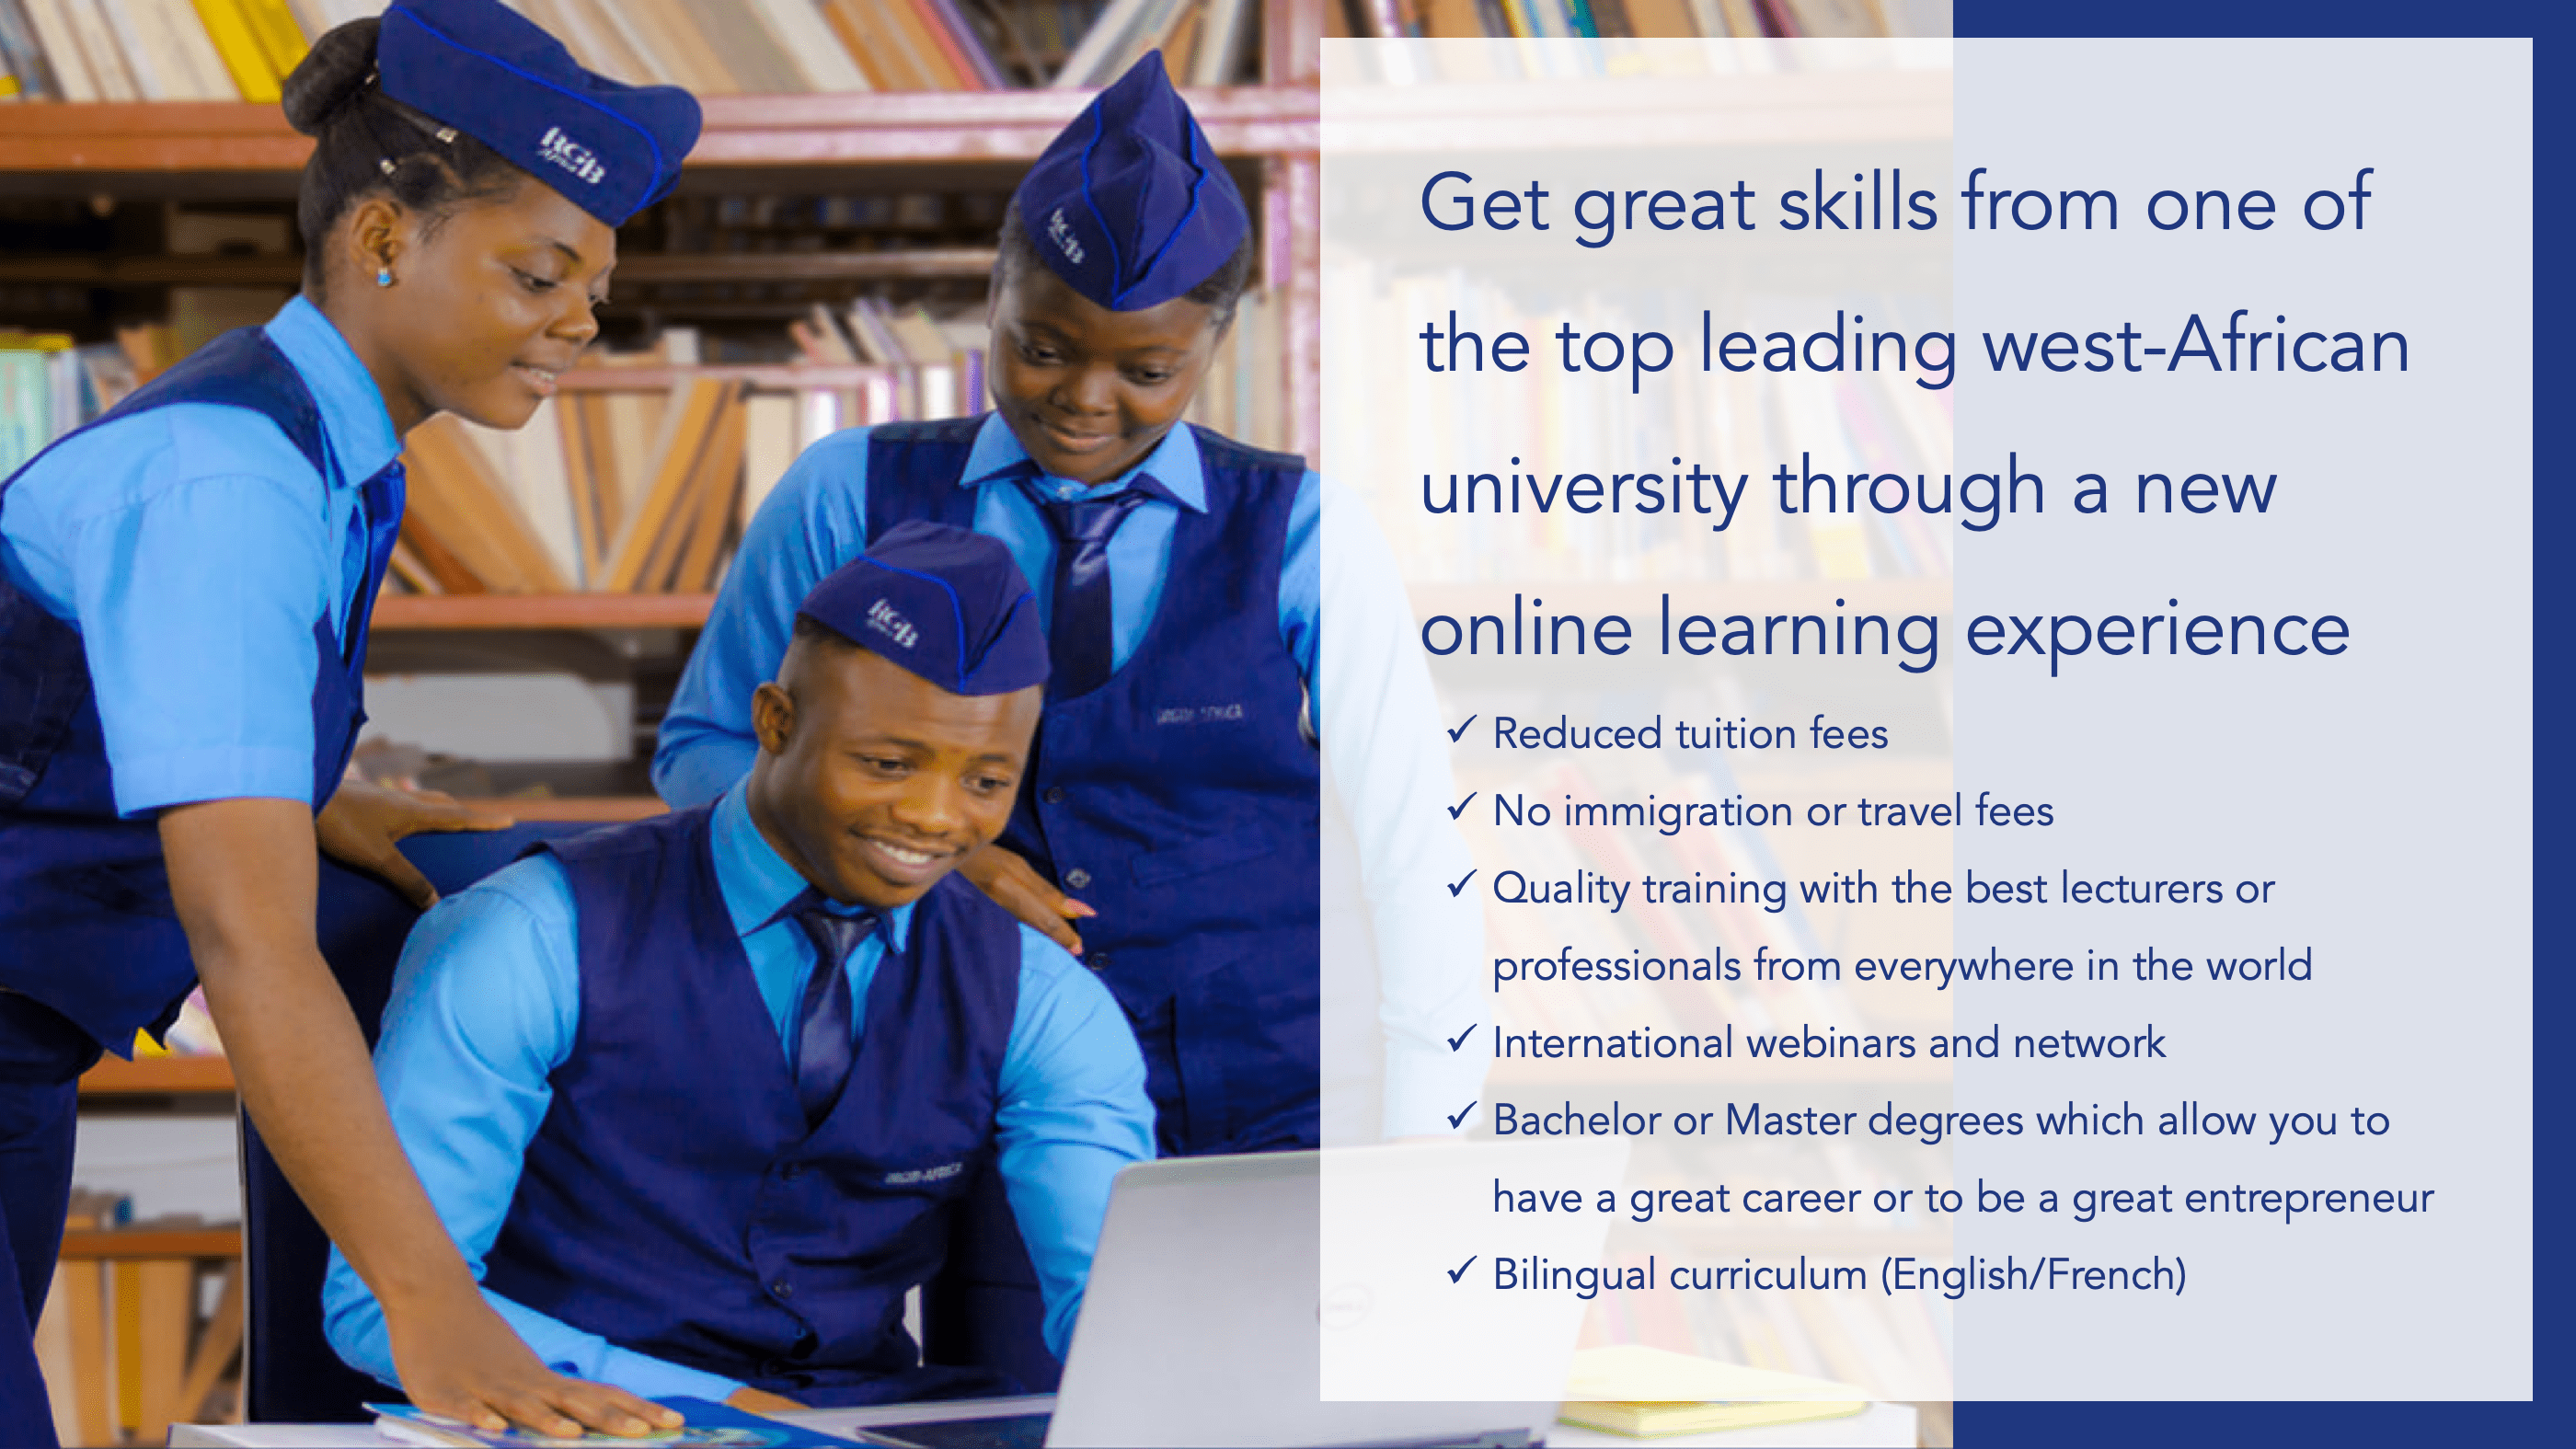 Get great skills from one of the top-leading west-African University